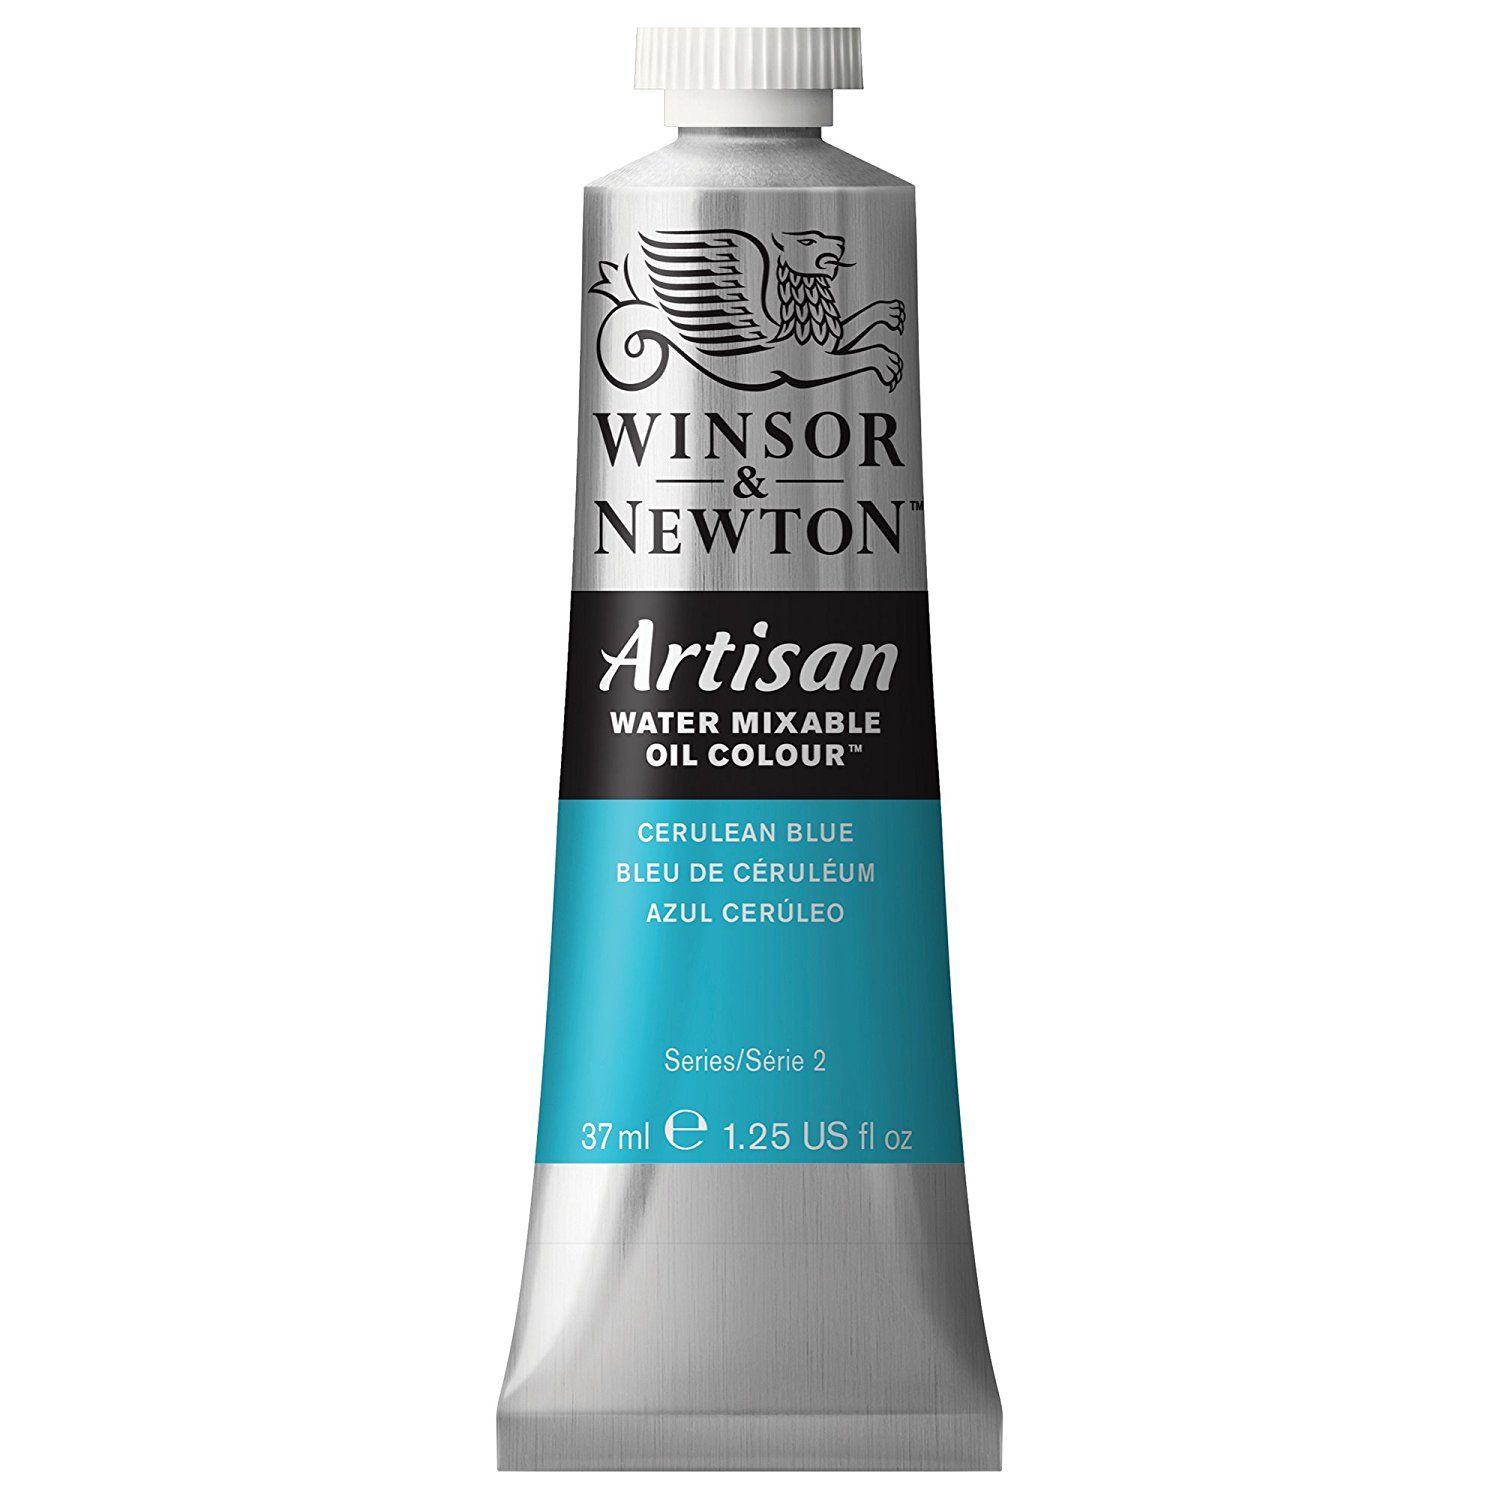 Artisan Water Mixable Oil - Cerulean Blue 37ml